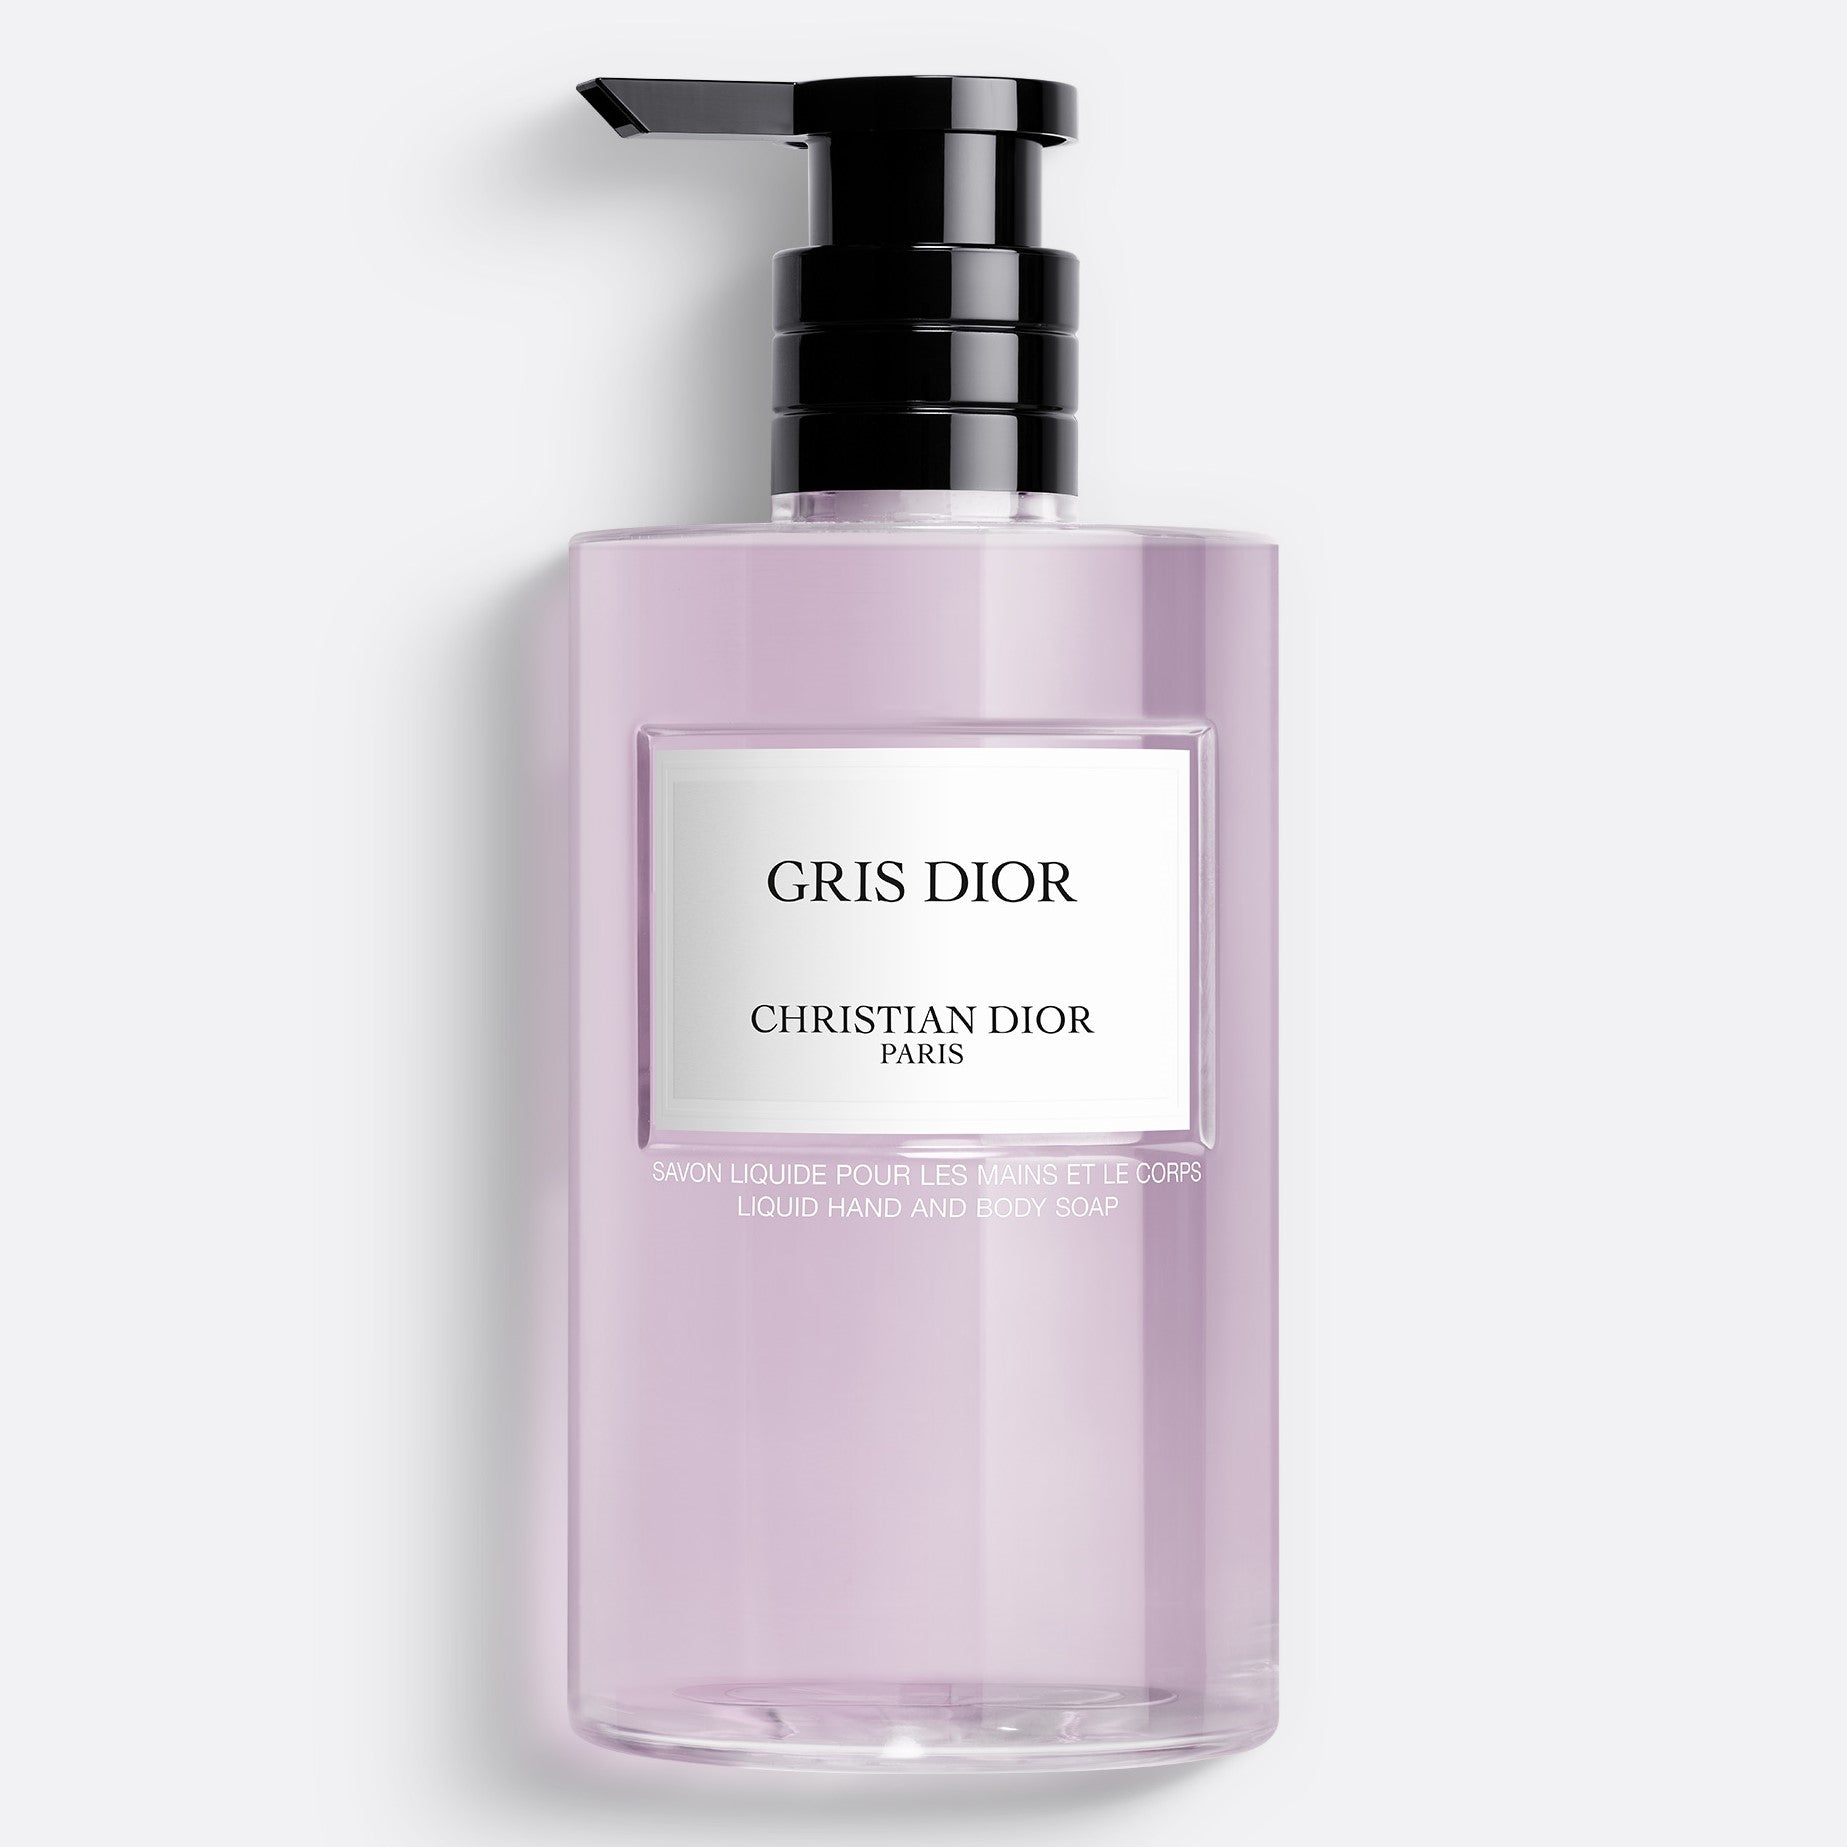 GRIS DIOR ~ Liquid Hand and Body Soap